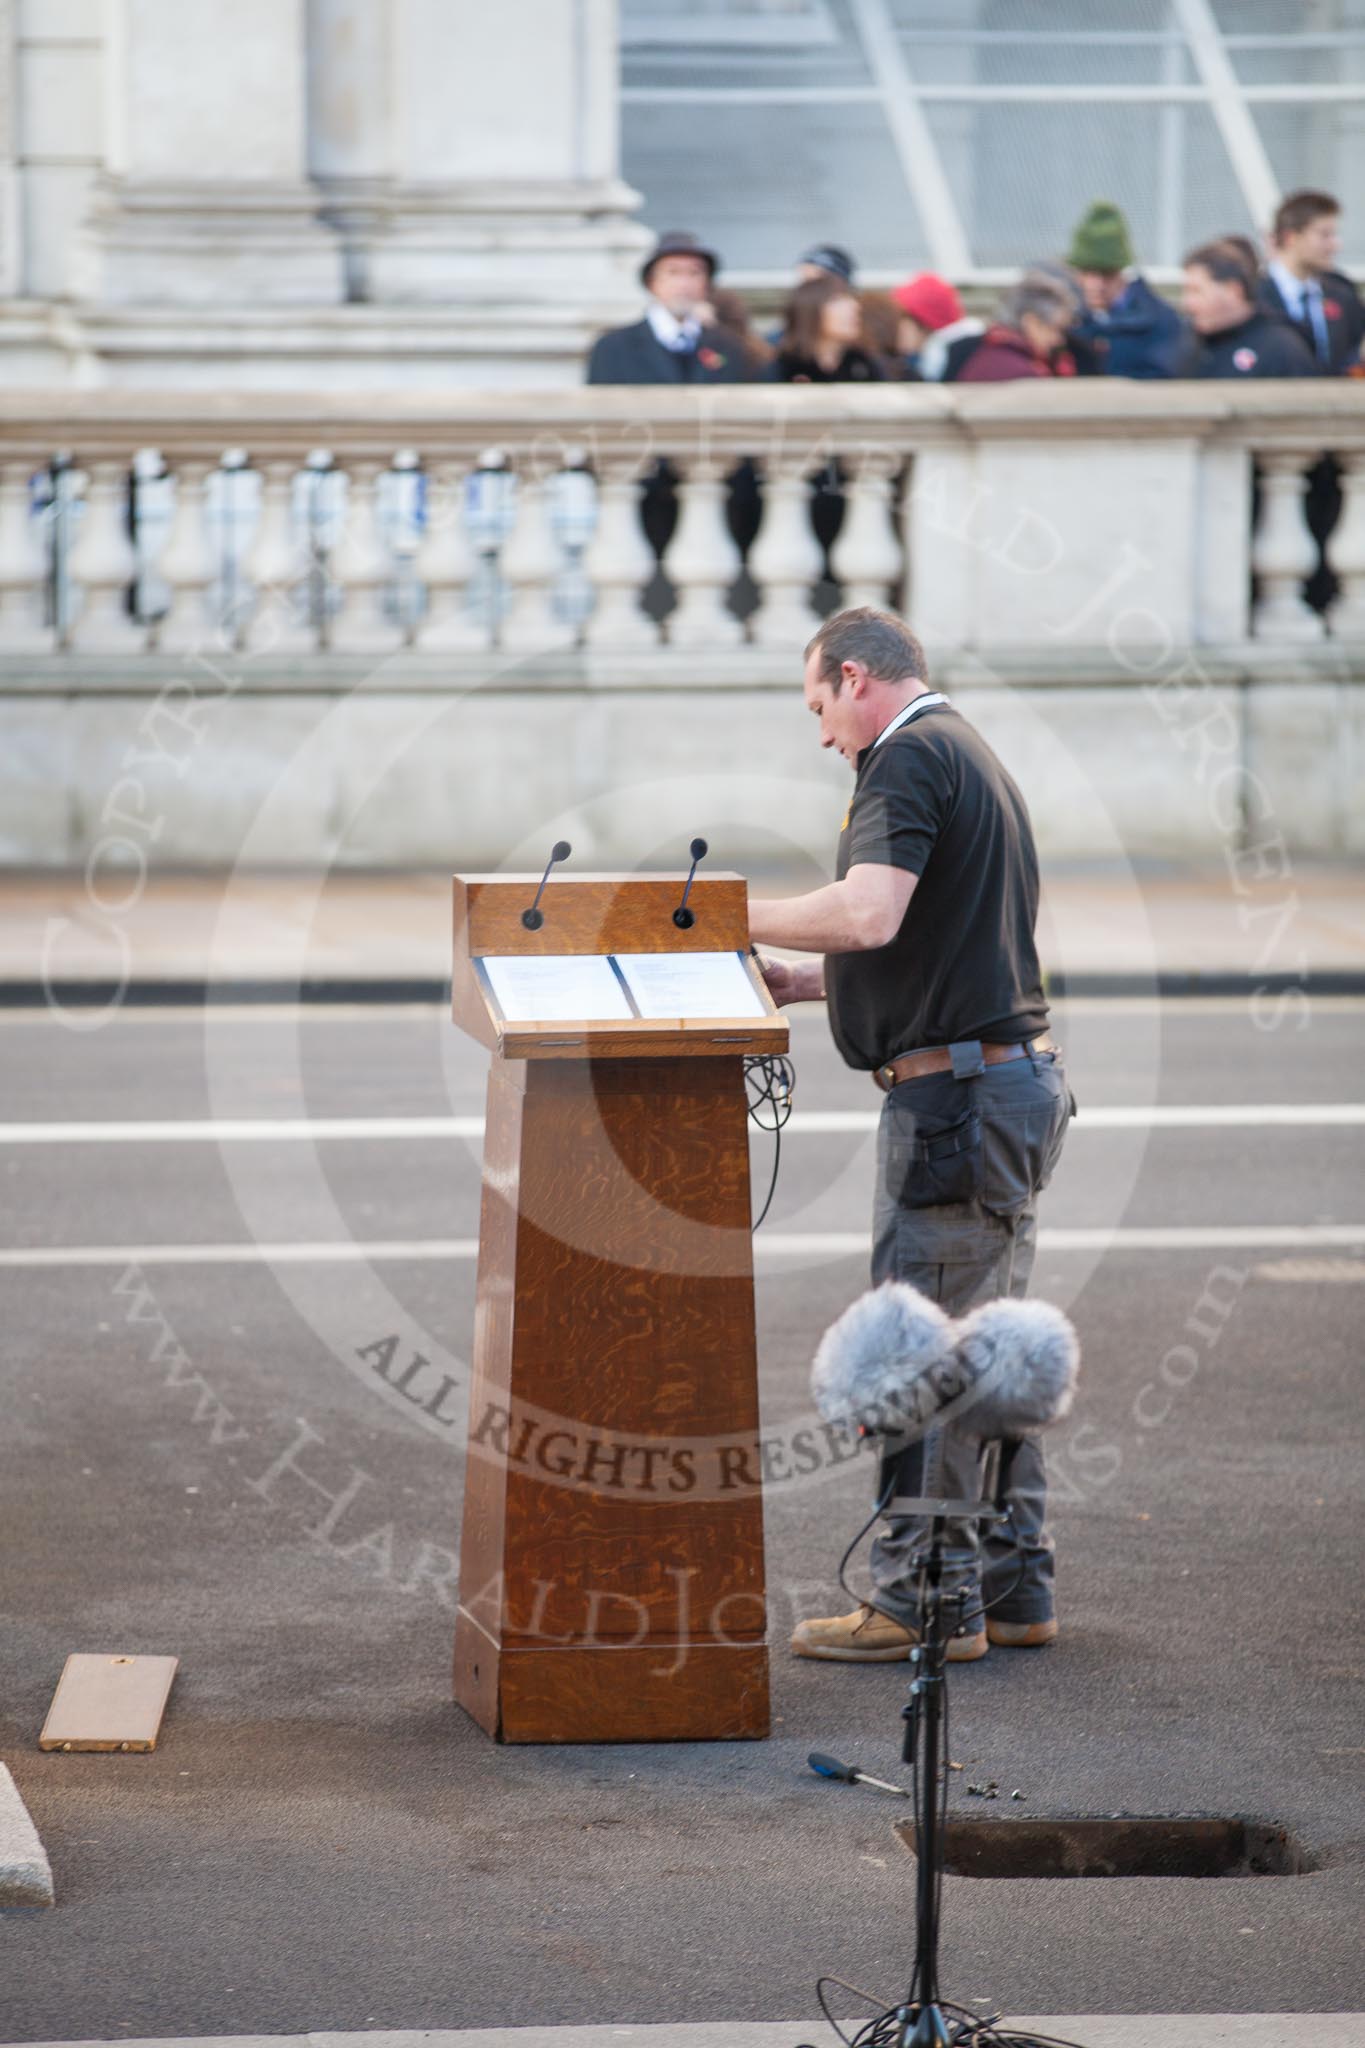 Preparations for Remembrance Sunday on Whitehall - the pulpit used for the service later is set up and wired.